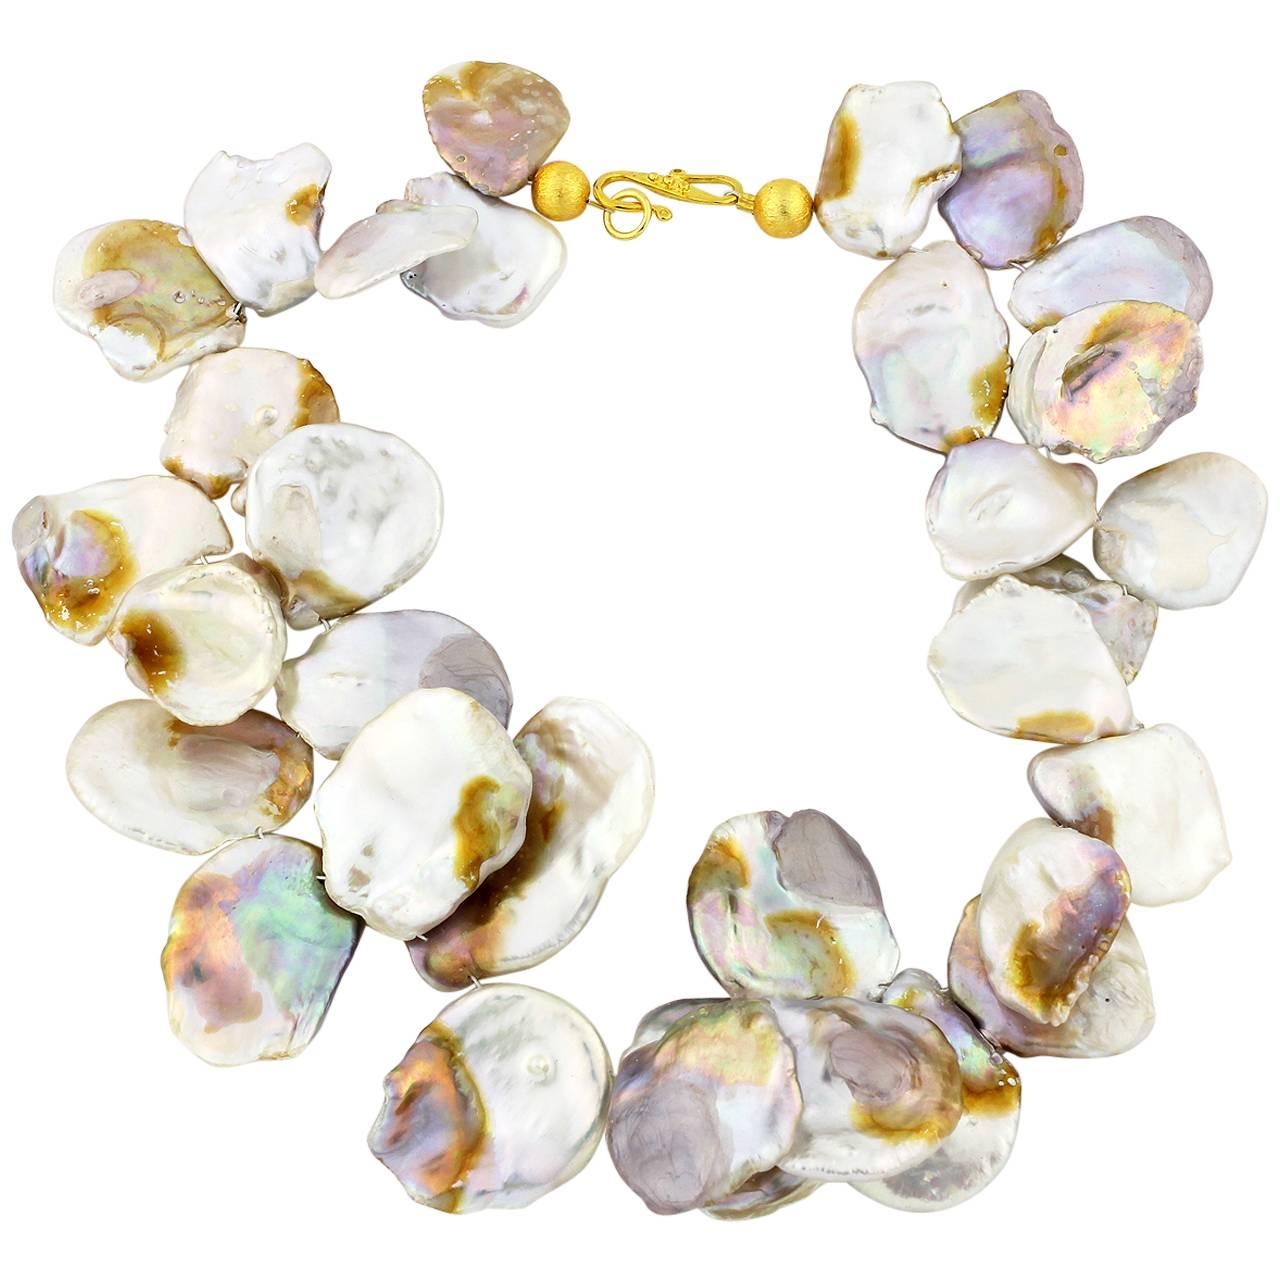 Dramatic Chic One-of-a-Kind Irridescent Real Keshi Pearl Necklace